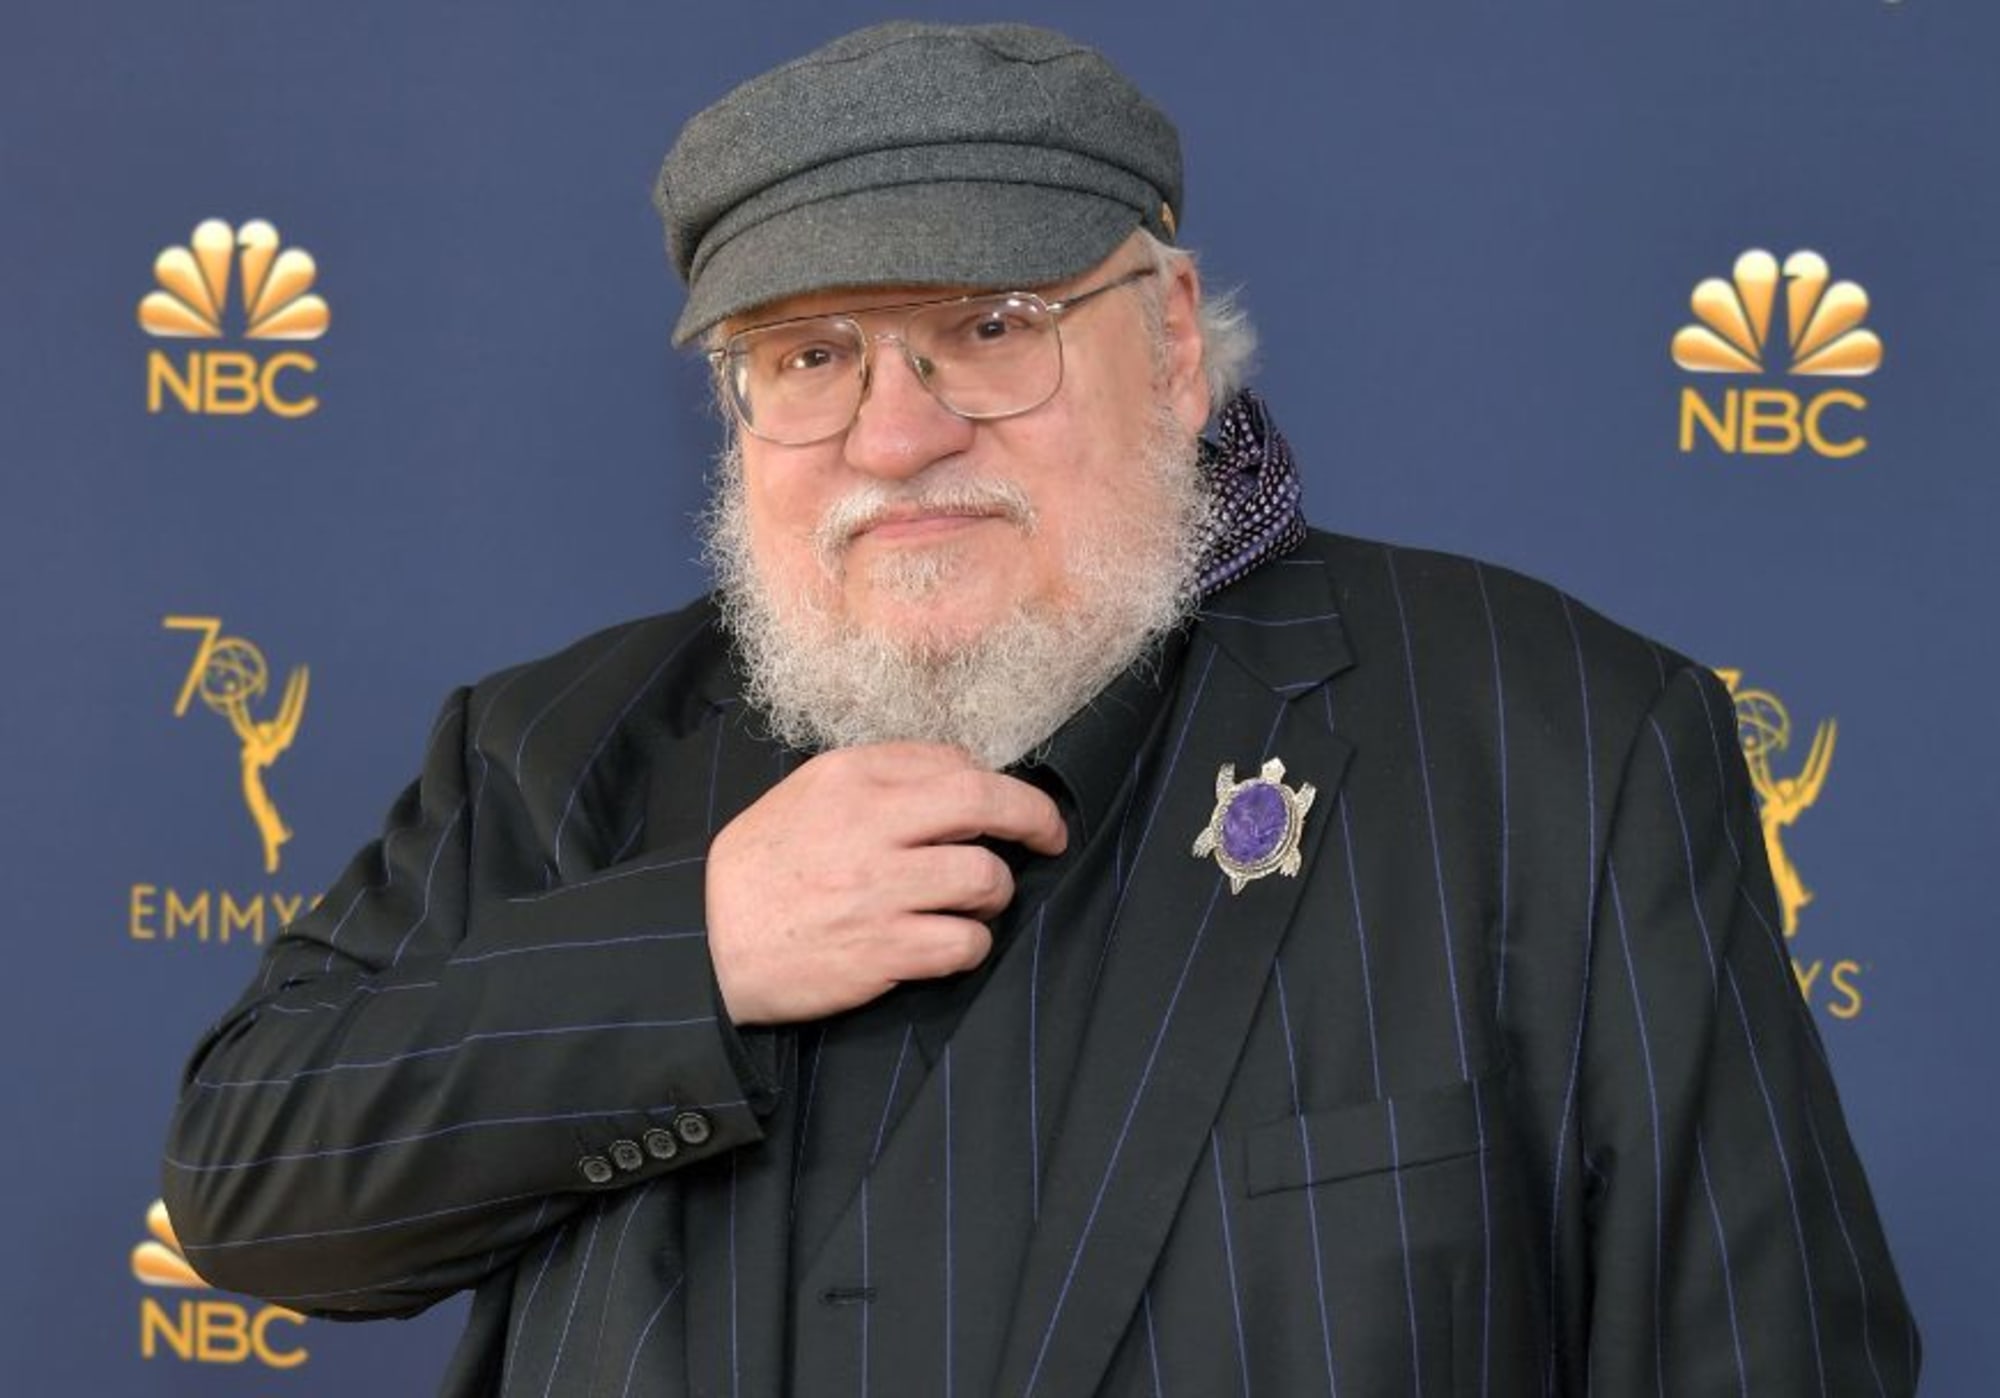 Game of Thrones creator George R.R. Martin opens up about his struggles